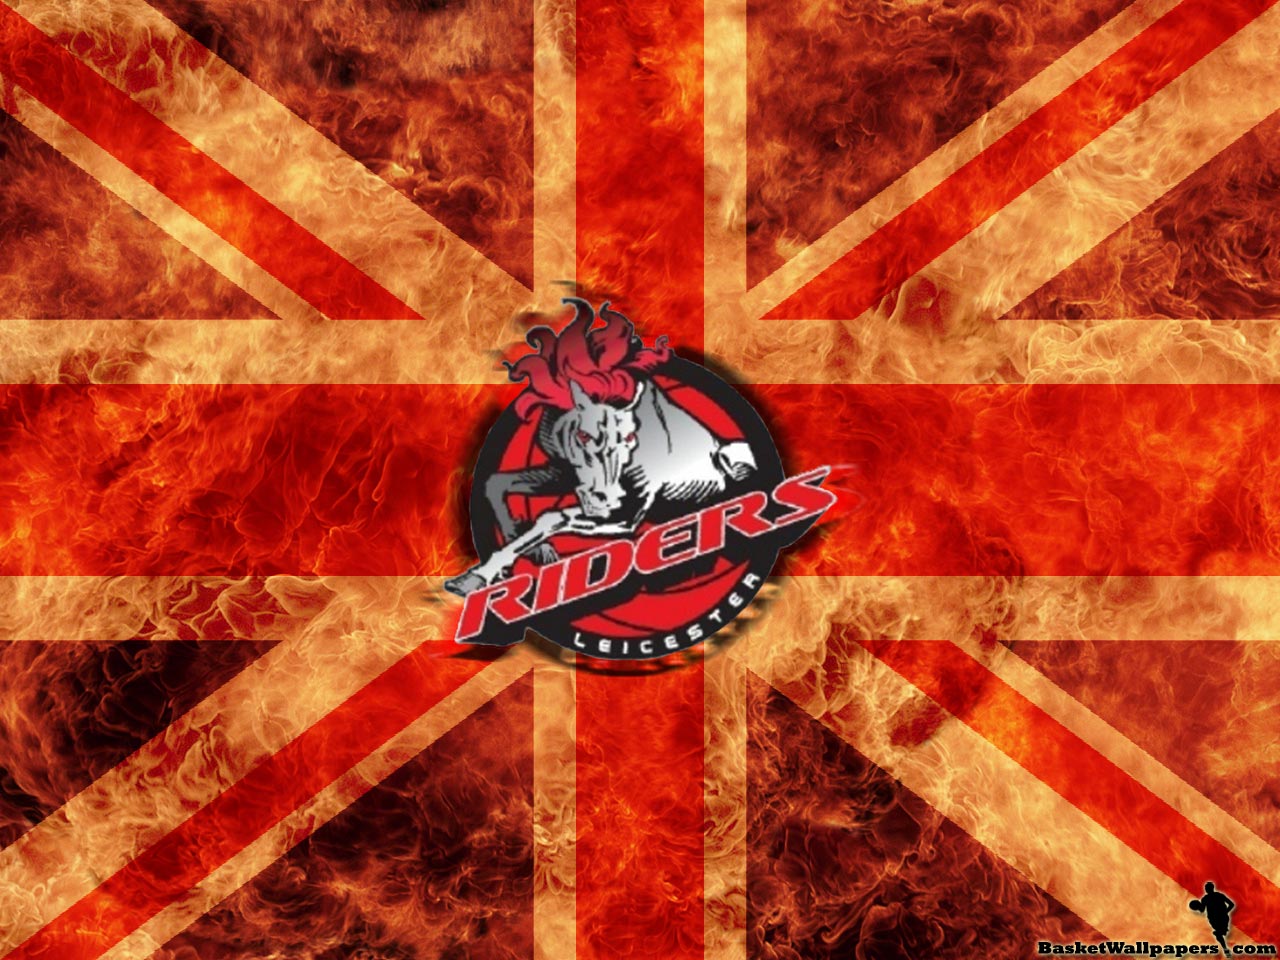 Leicester Riders Wallpaper | Basketball Wallpapers at BasketWallpapers.com1280 x 960